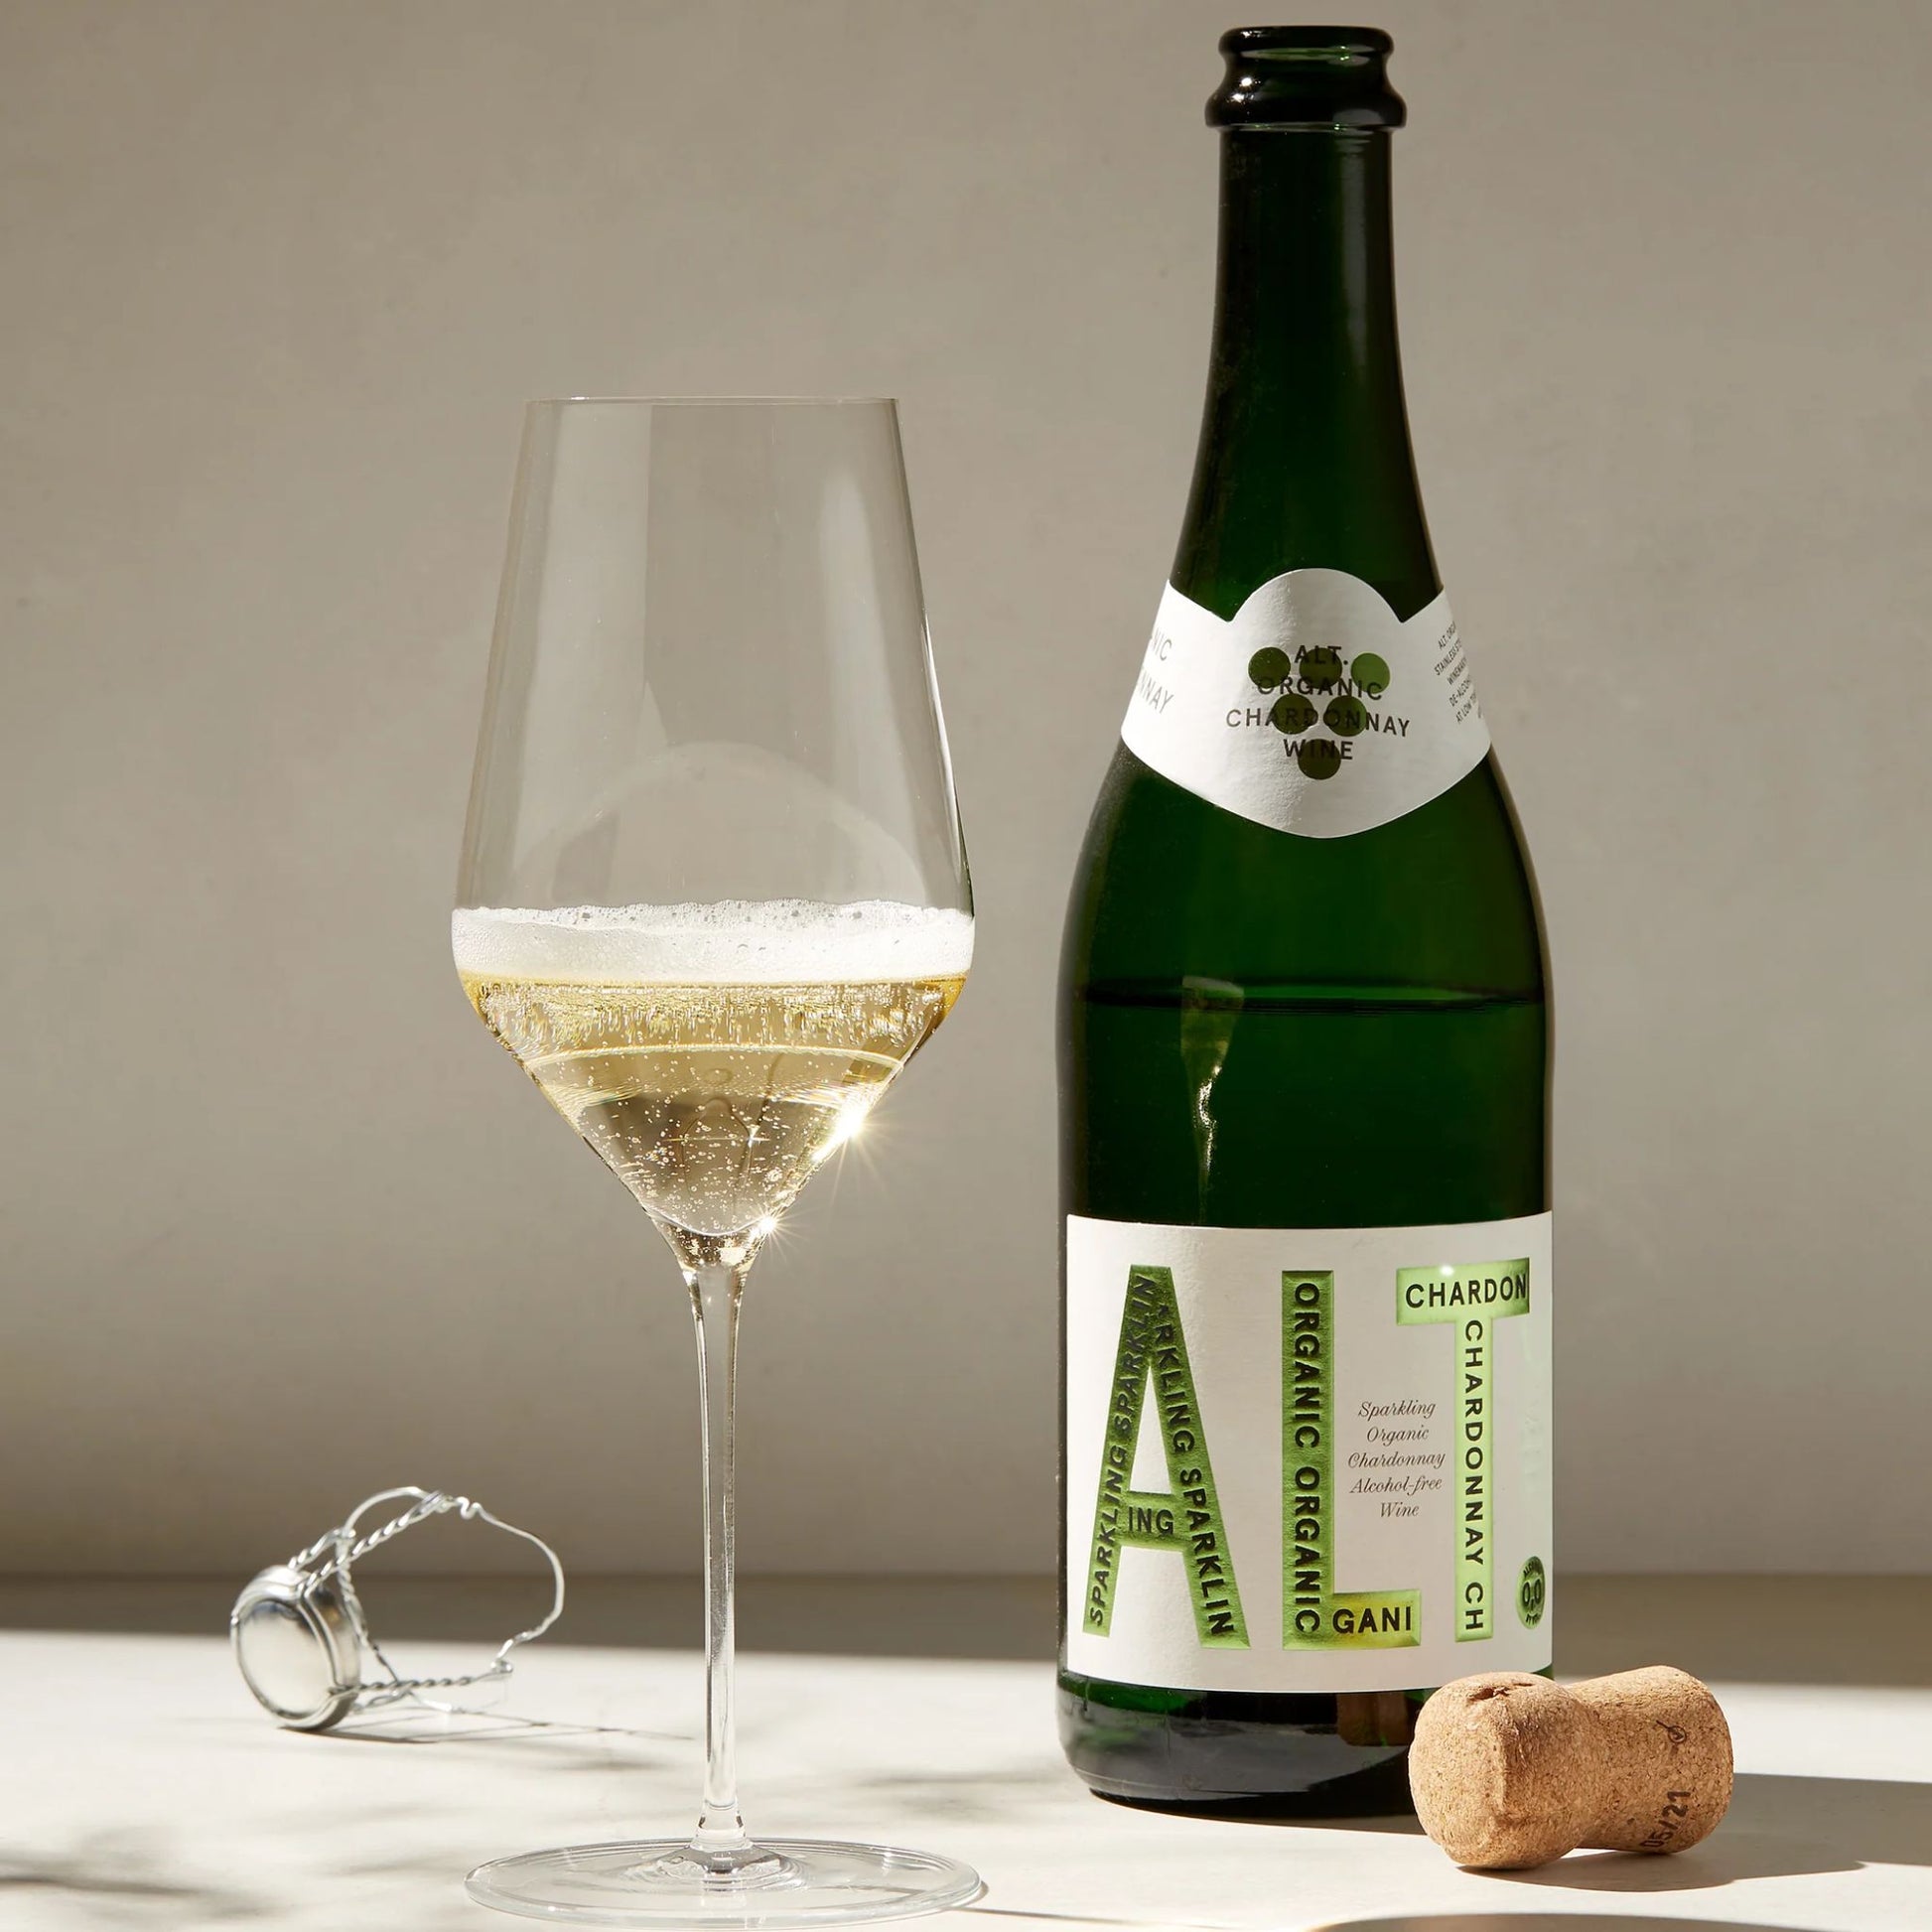 ALT. Non-Alcoholic Sparkling Organic Blanc de Blancs is available at Knyota Non-Alcoholic Drinks.